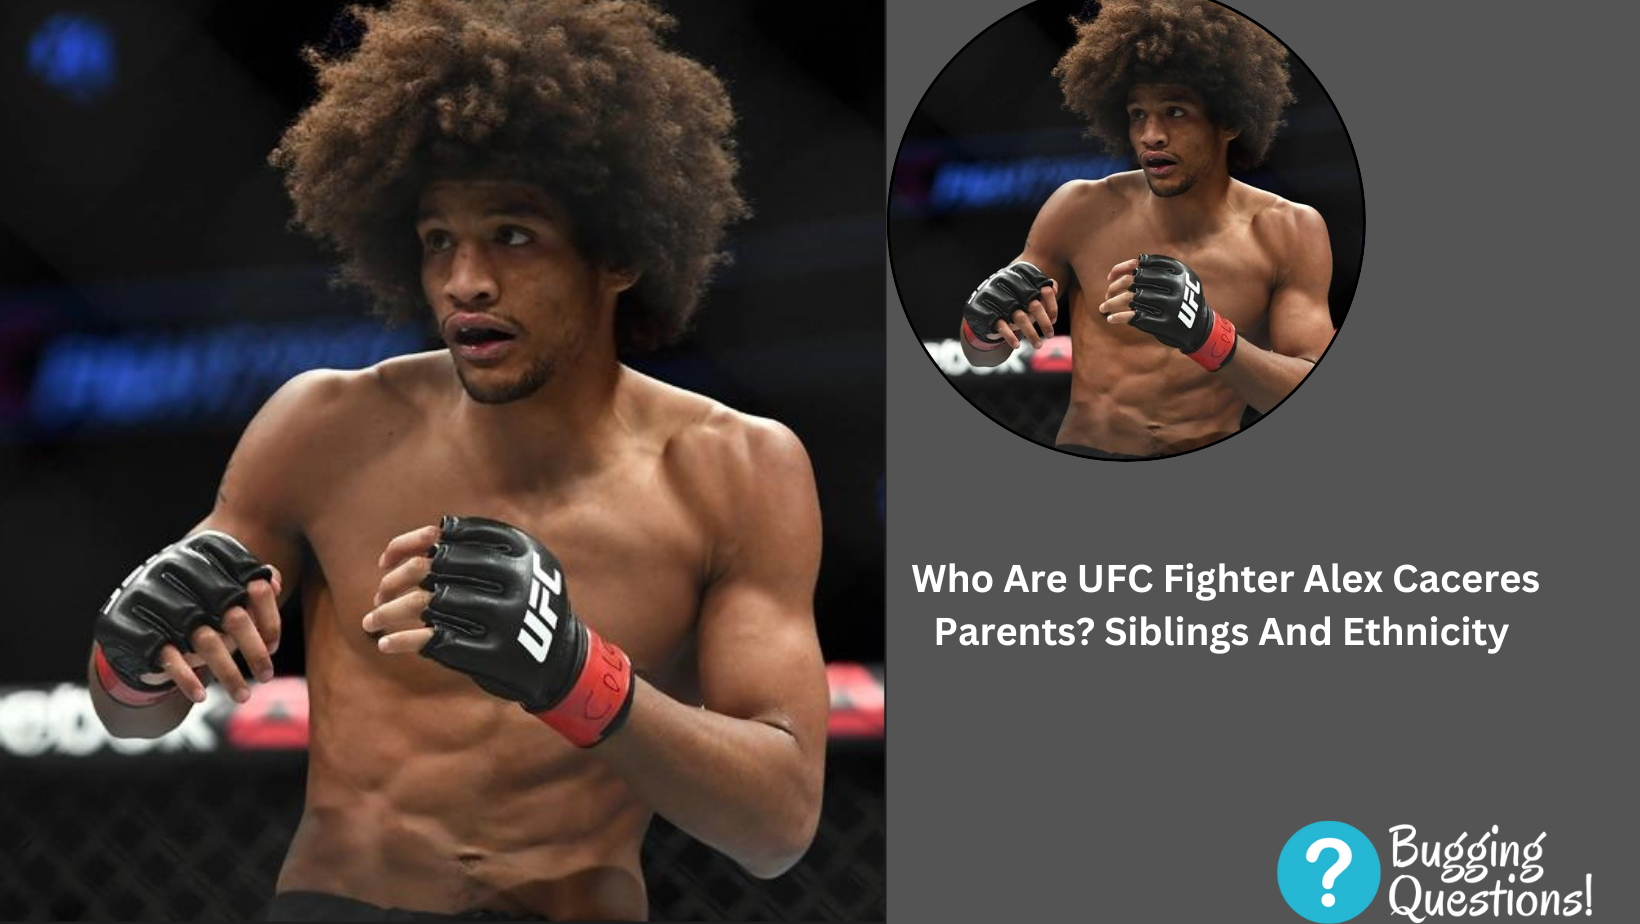 Who Are UFC Fighter Alex Caceres Parents?